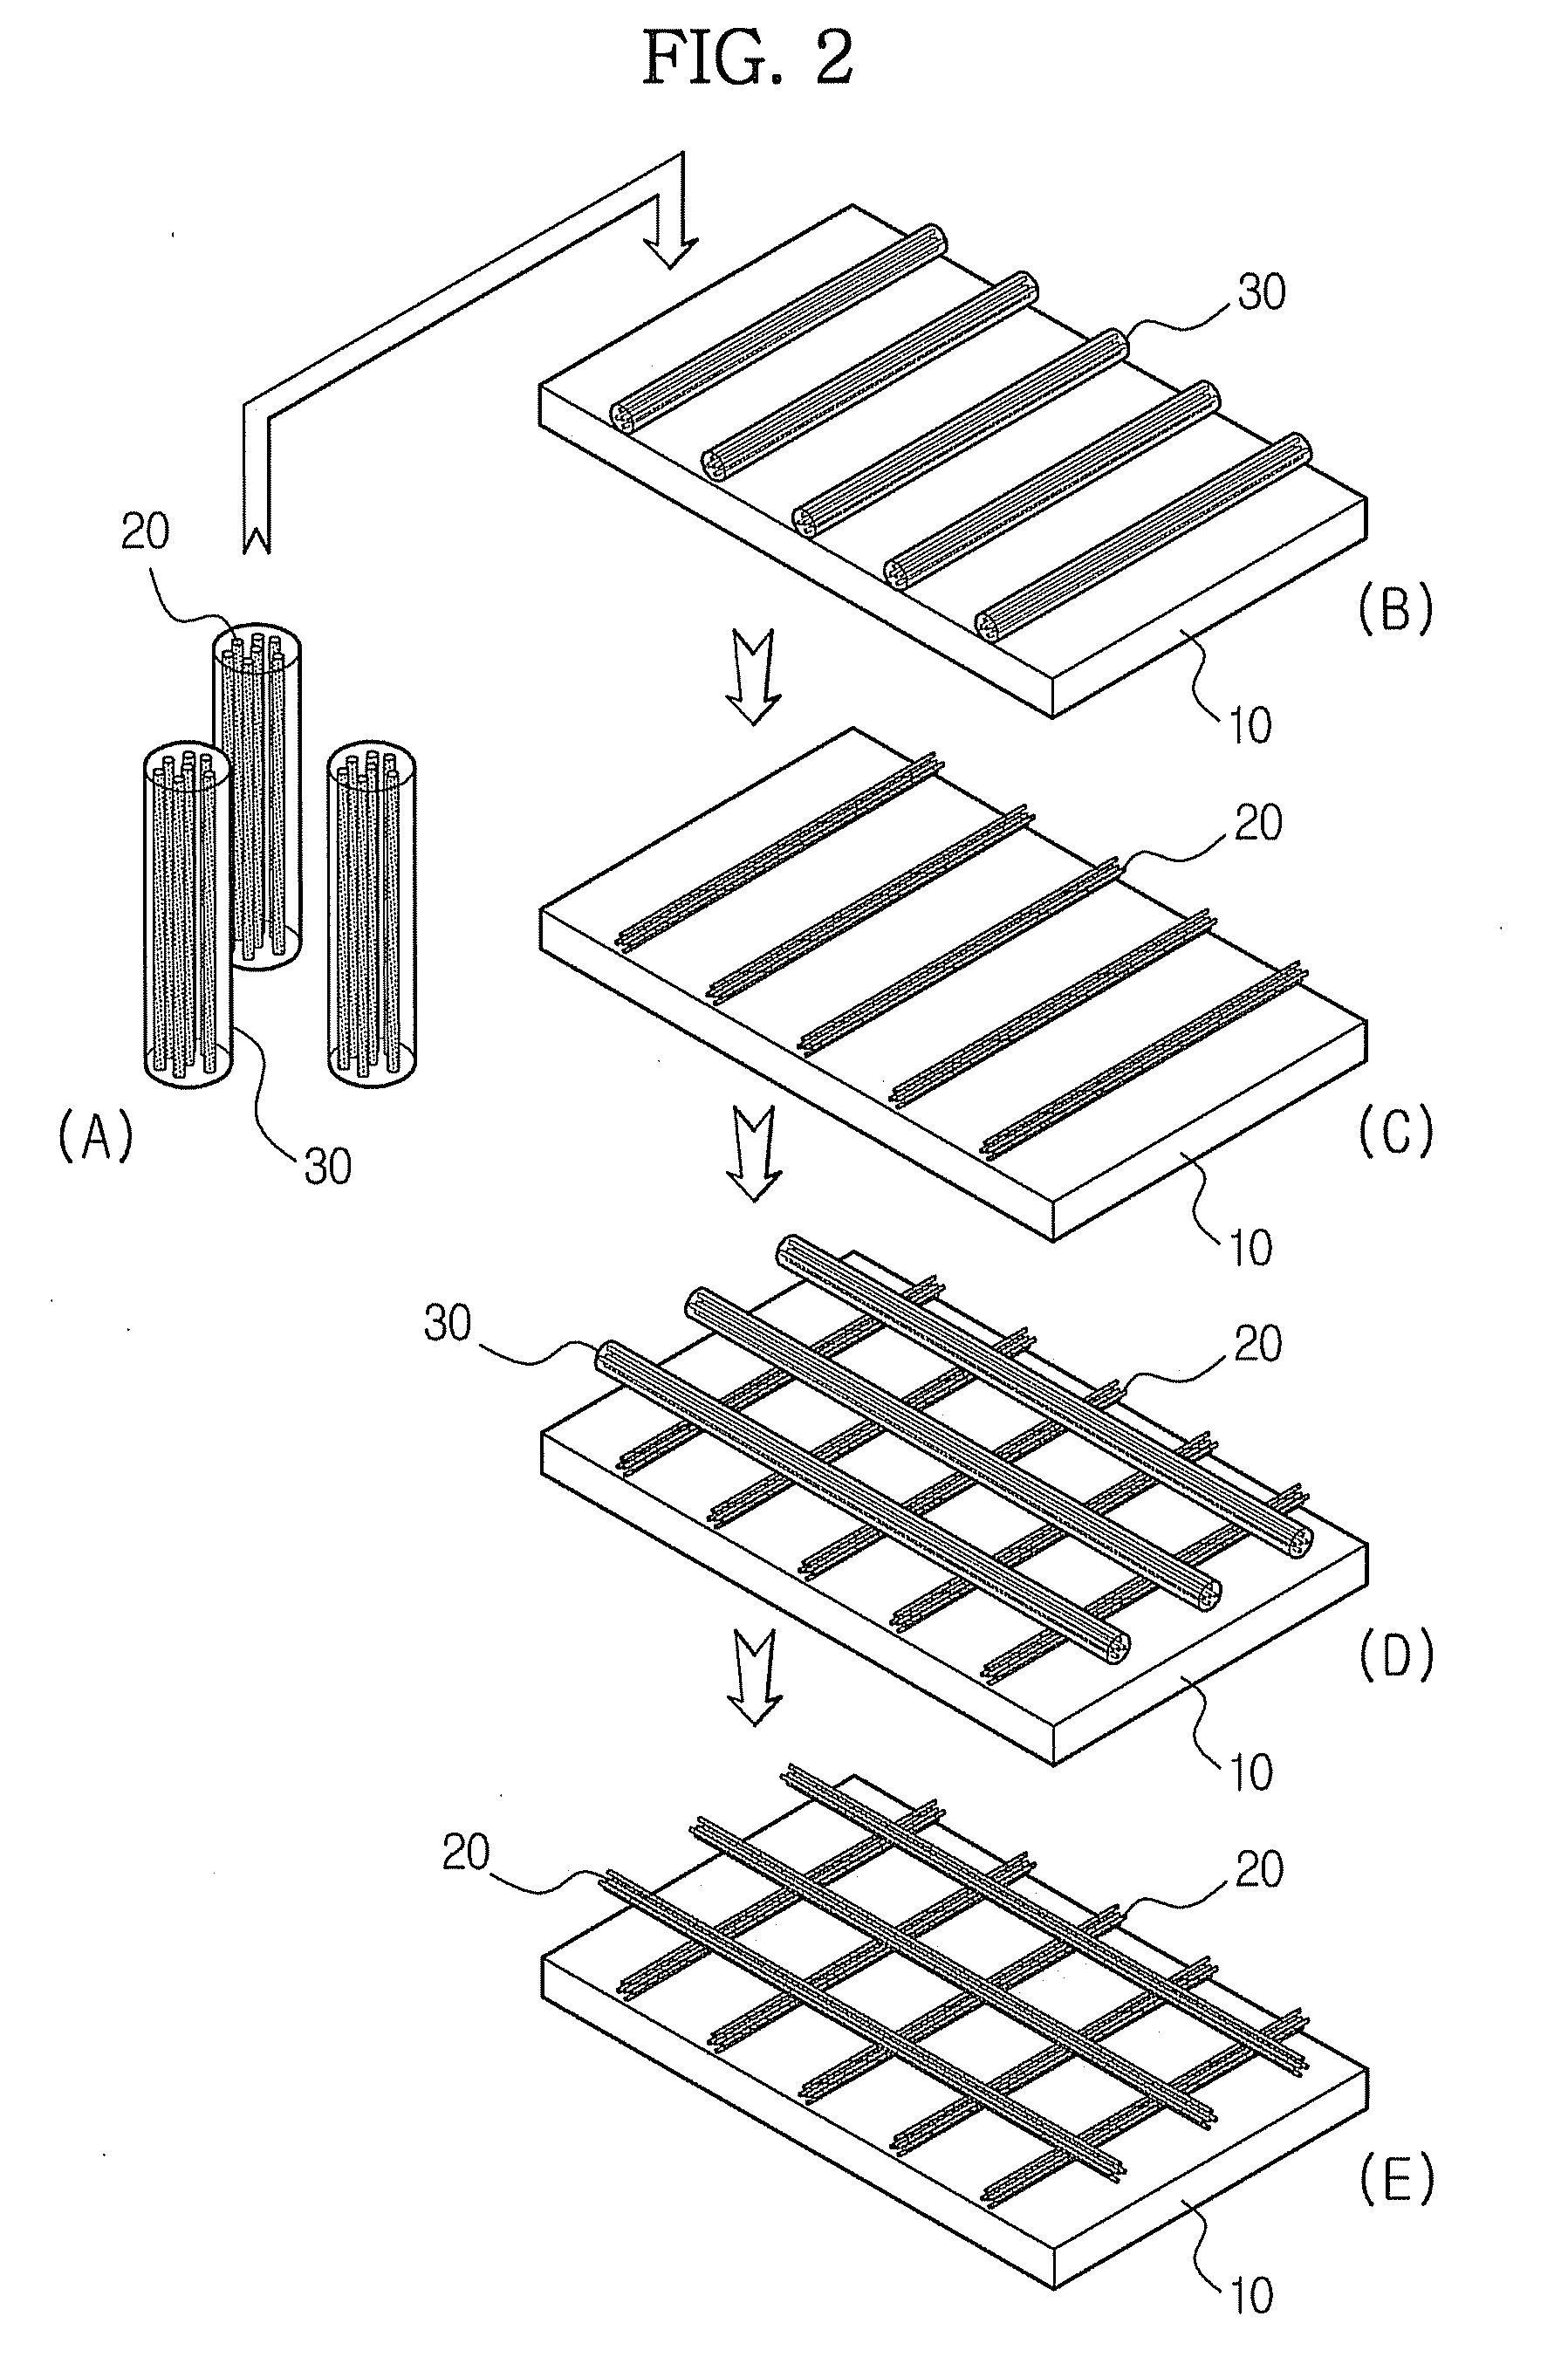 Method of preparing patterned carbon nanotube array and patterned carbon nanotube array prepared thereby